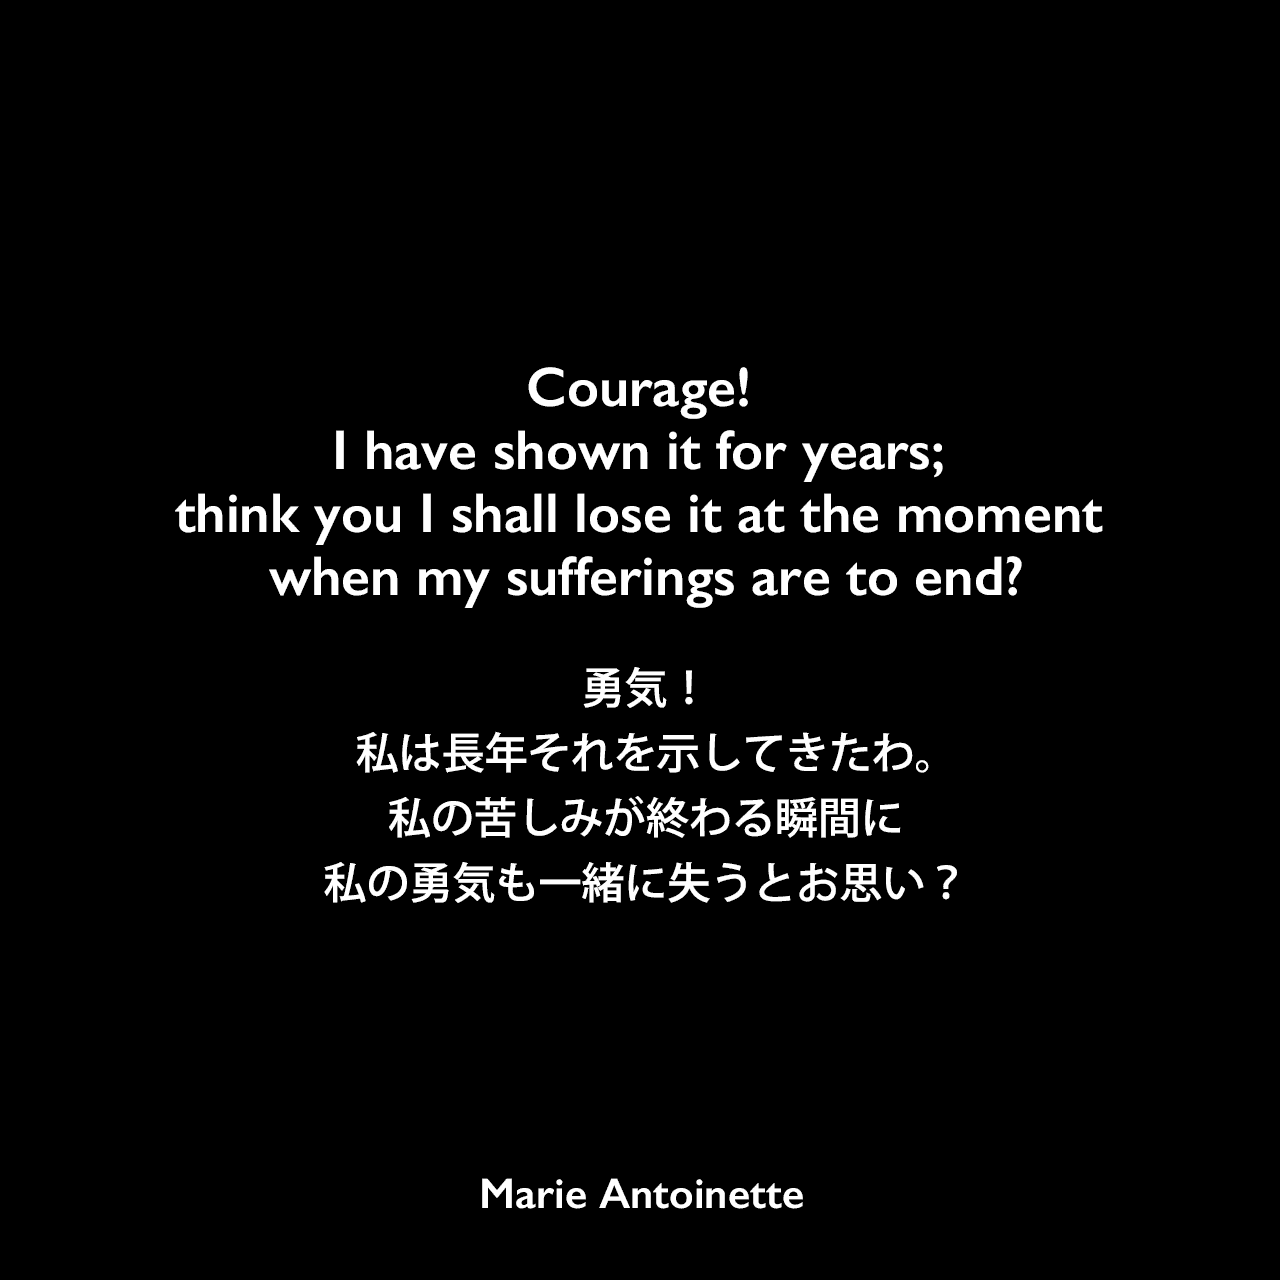 Courage! I have shown it for years; think you I shall lose it at the moment when my sufferings are to end?勇気！私は長年それを示してきたわ。私の苦しみが終わる瞬間に私の勇気も一緒に失うとお思い？Marie Antoinette